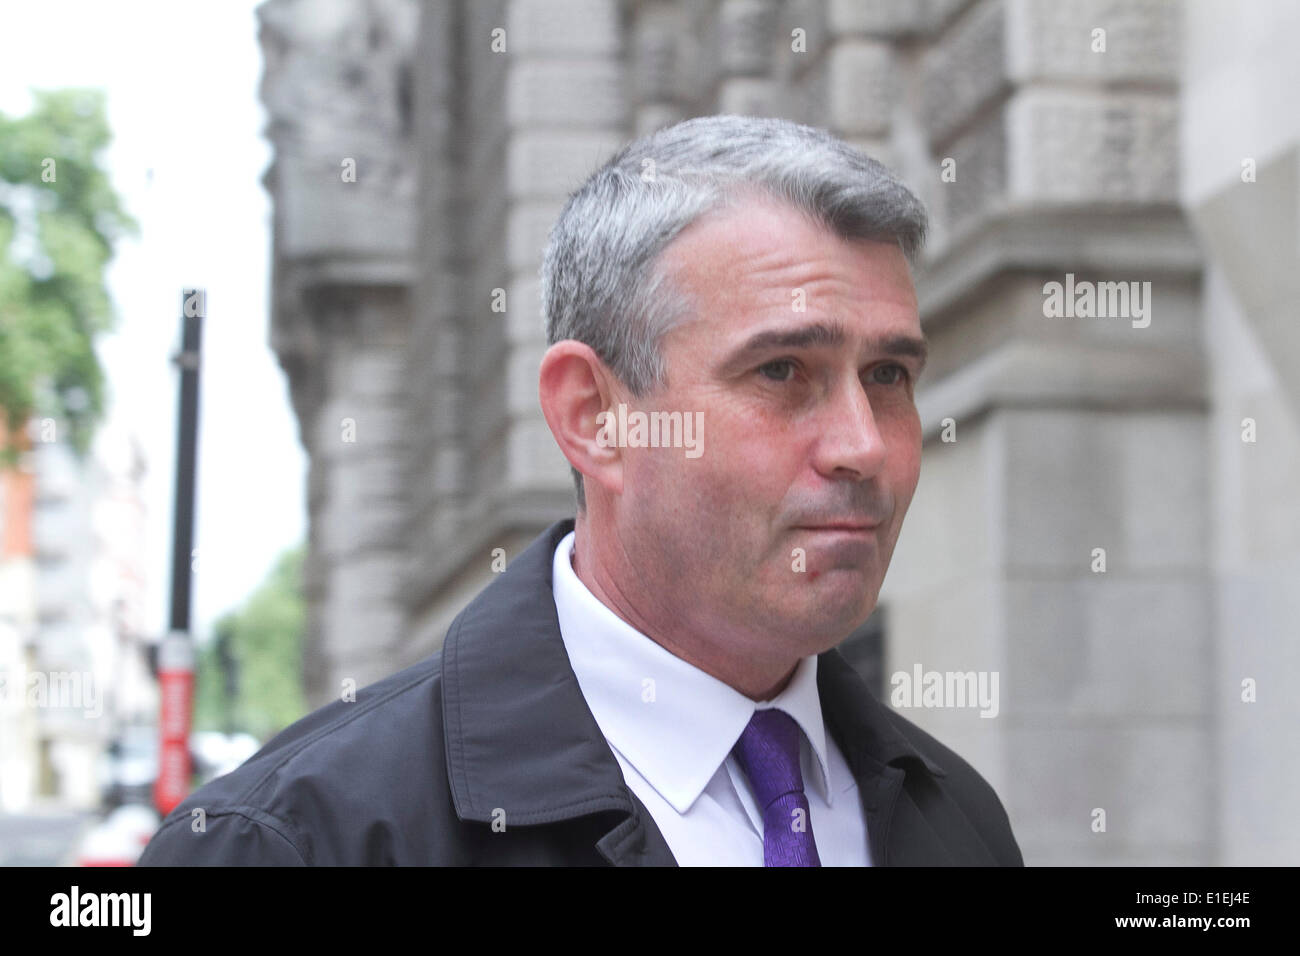 London UK. 2nd June 2014. Former Head of security at News International Mark Hanna arrives at the the Old Bailey as the hacking trial continues. Mark Hanna and seven other defendants including Rebekah Brooks, Charlie Brooks, Ian Edmonson, Stuart Kuttner,Clive Goodman,Cheryl Carter   face charges related to allegations of conspiracy to intercept communications and voice mail of well know people including that of murder victim Milly Dowler Credit:  amer ghazzal/Alamy Live News Stock Photo